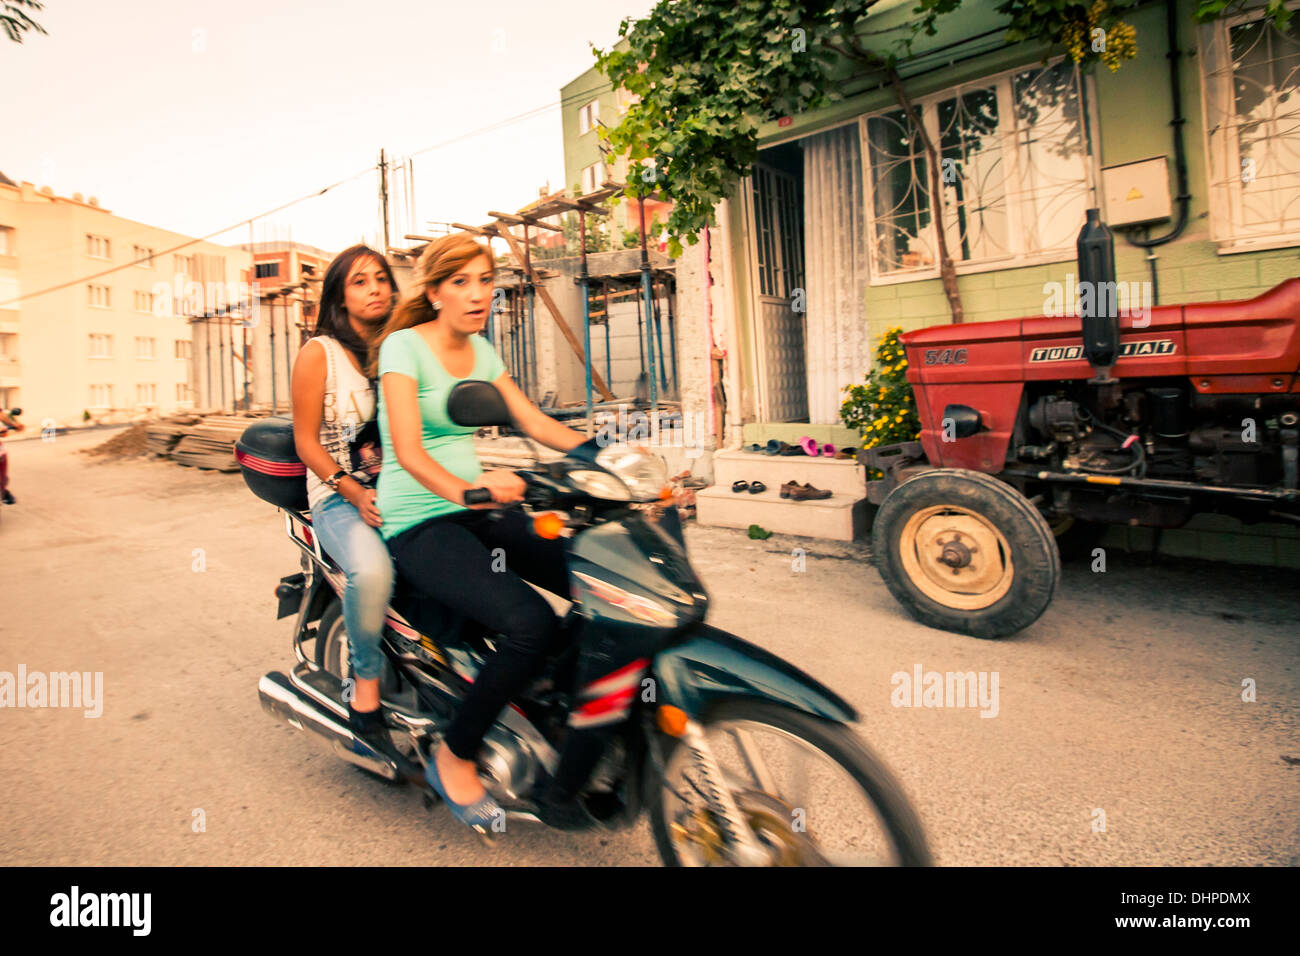 Two girls riding a scooter in Soma, Turkey 2013 Stock Photo